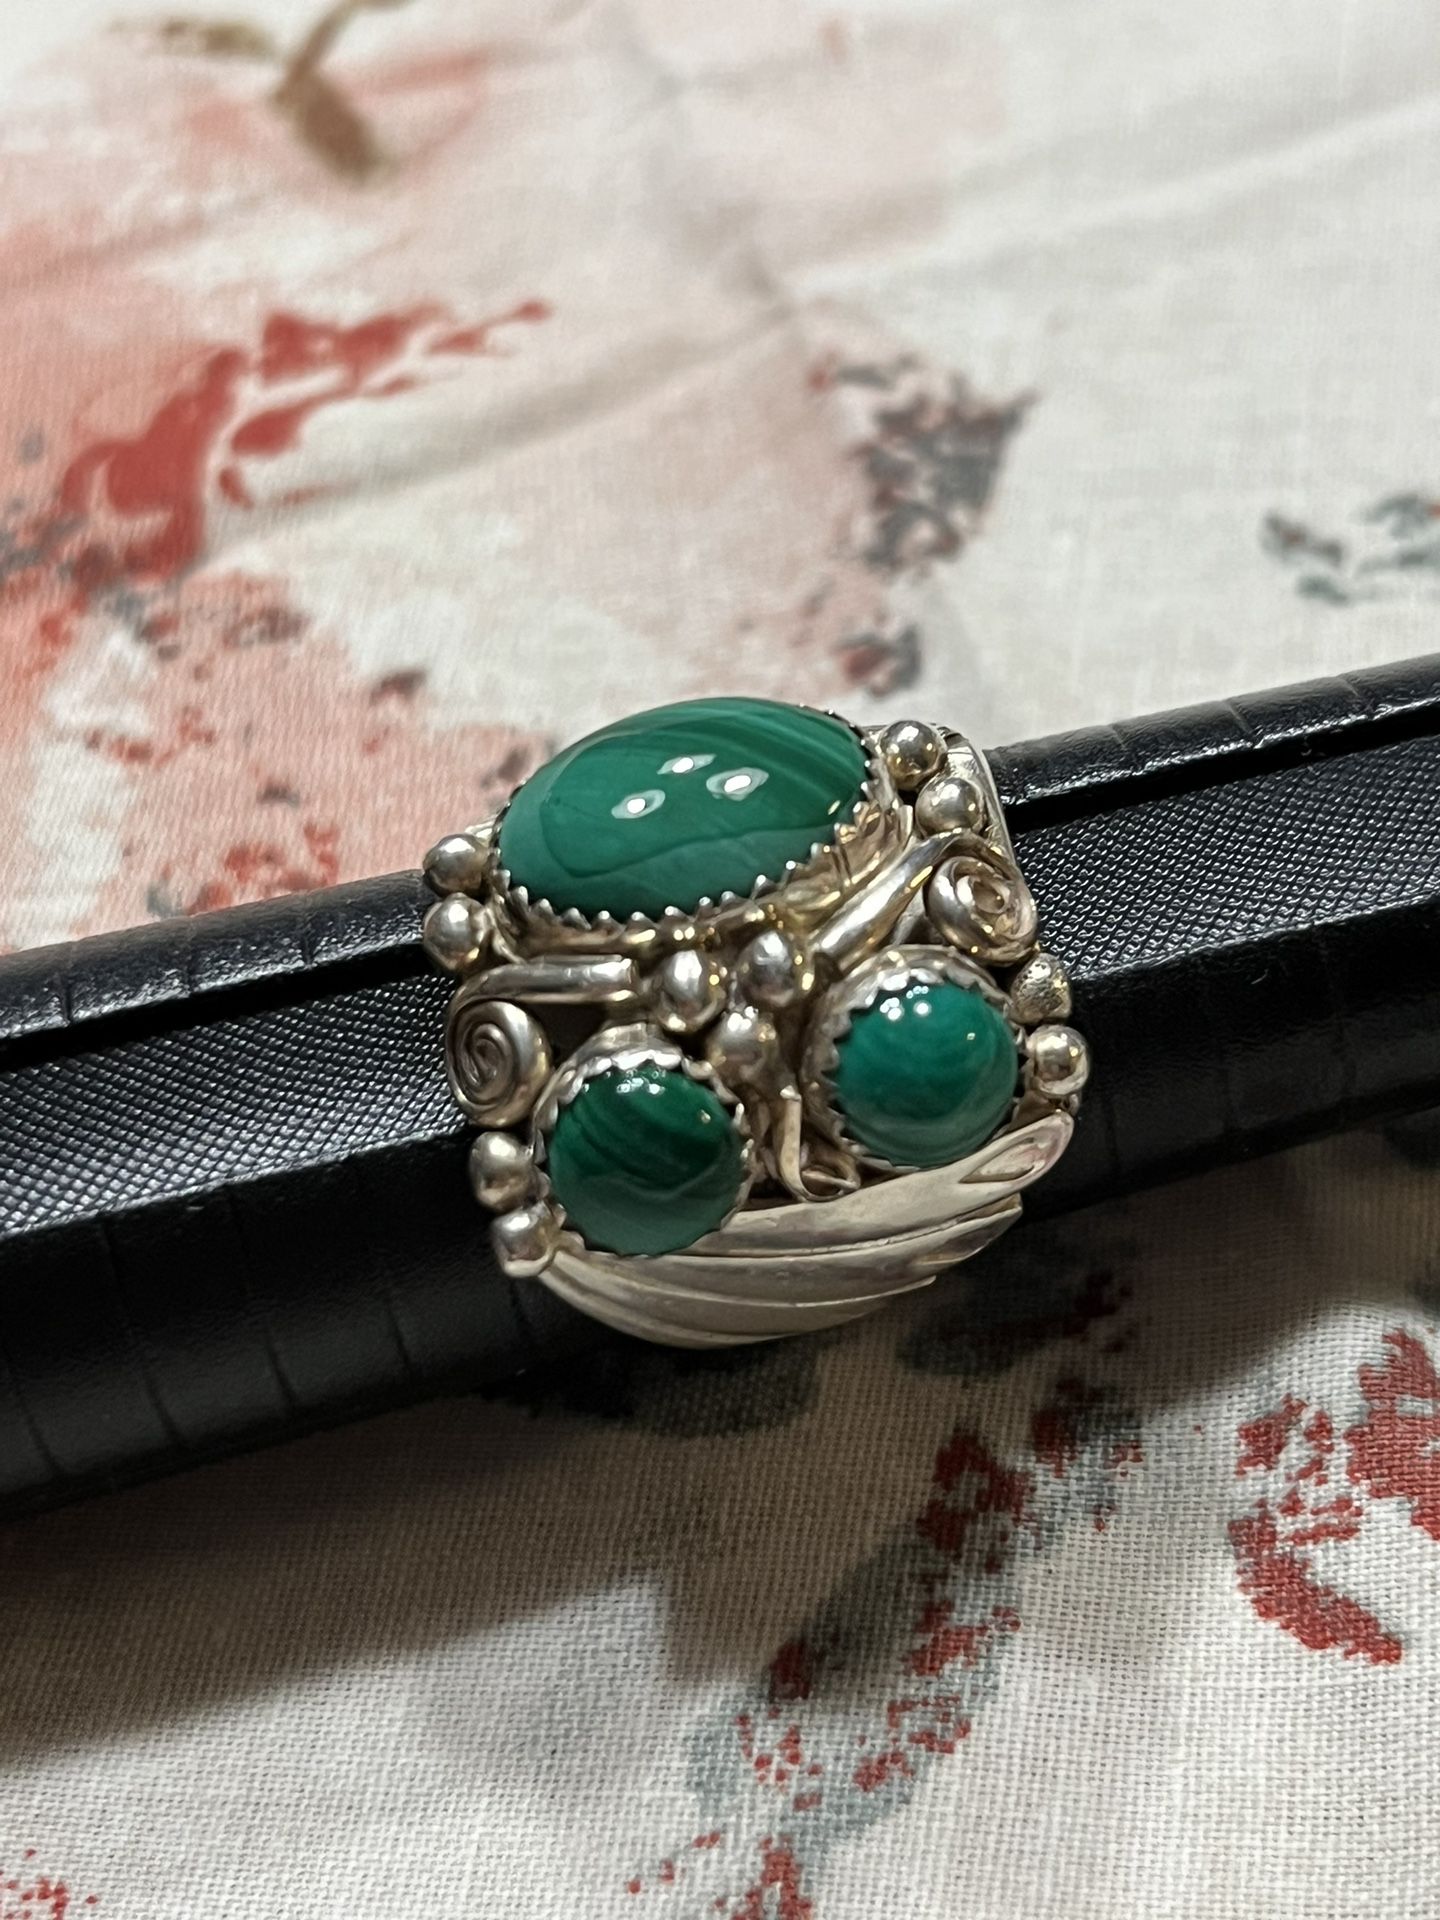 Stunning Sterling Silver Malachite Ring With Matching Earrings Hallmarked